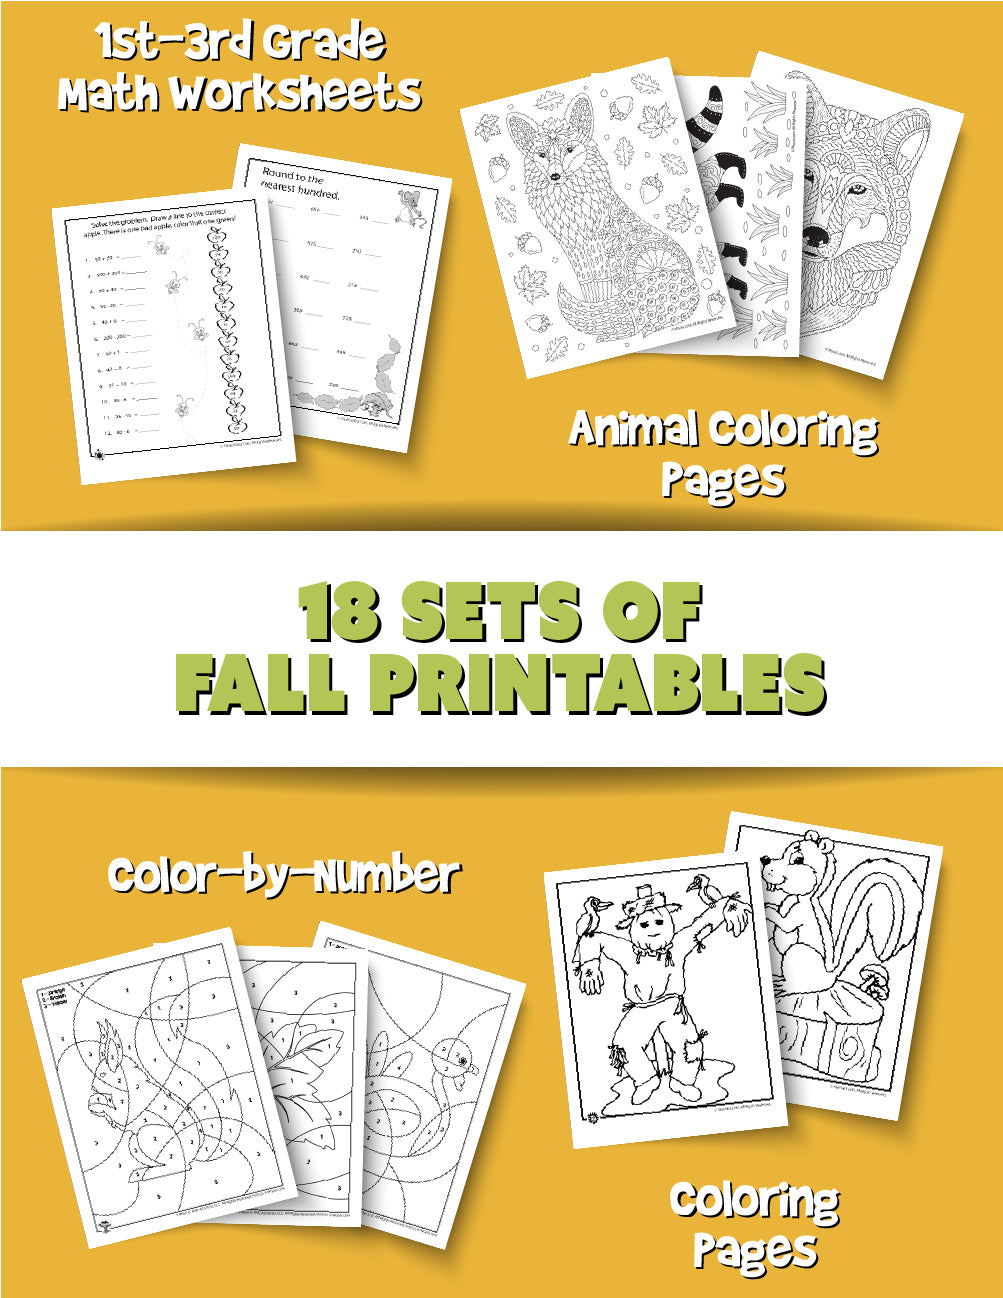 Color By Number Coloring Books For kids ages 8-12: Buy Color By Number Coloring  Books For kids ages 8-12 by Publishing Royal Activity at Low Price in India